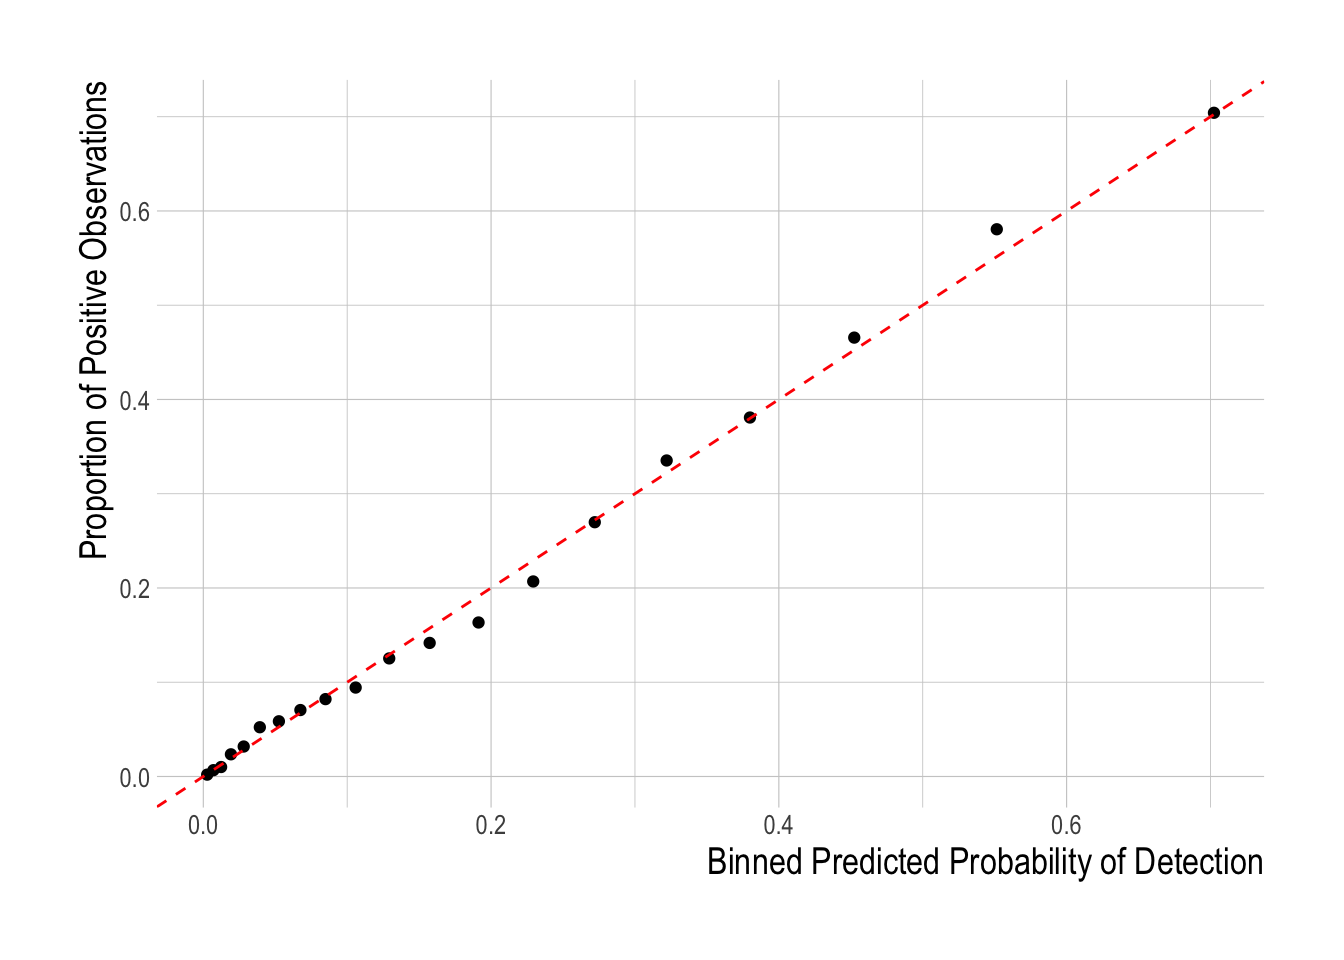 Binned mean predicted probability of detection provided by the first stage of the hurdle model vs observed proportion of positive detections